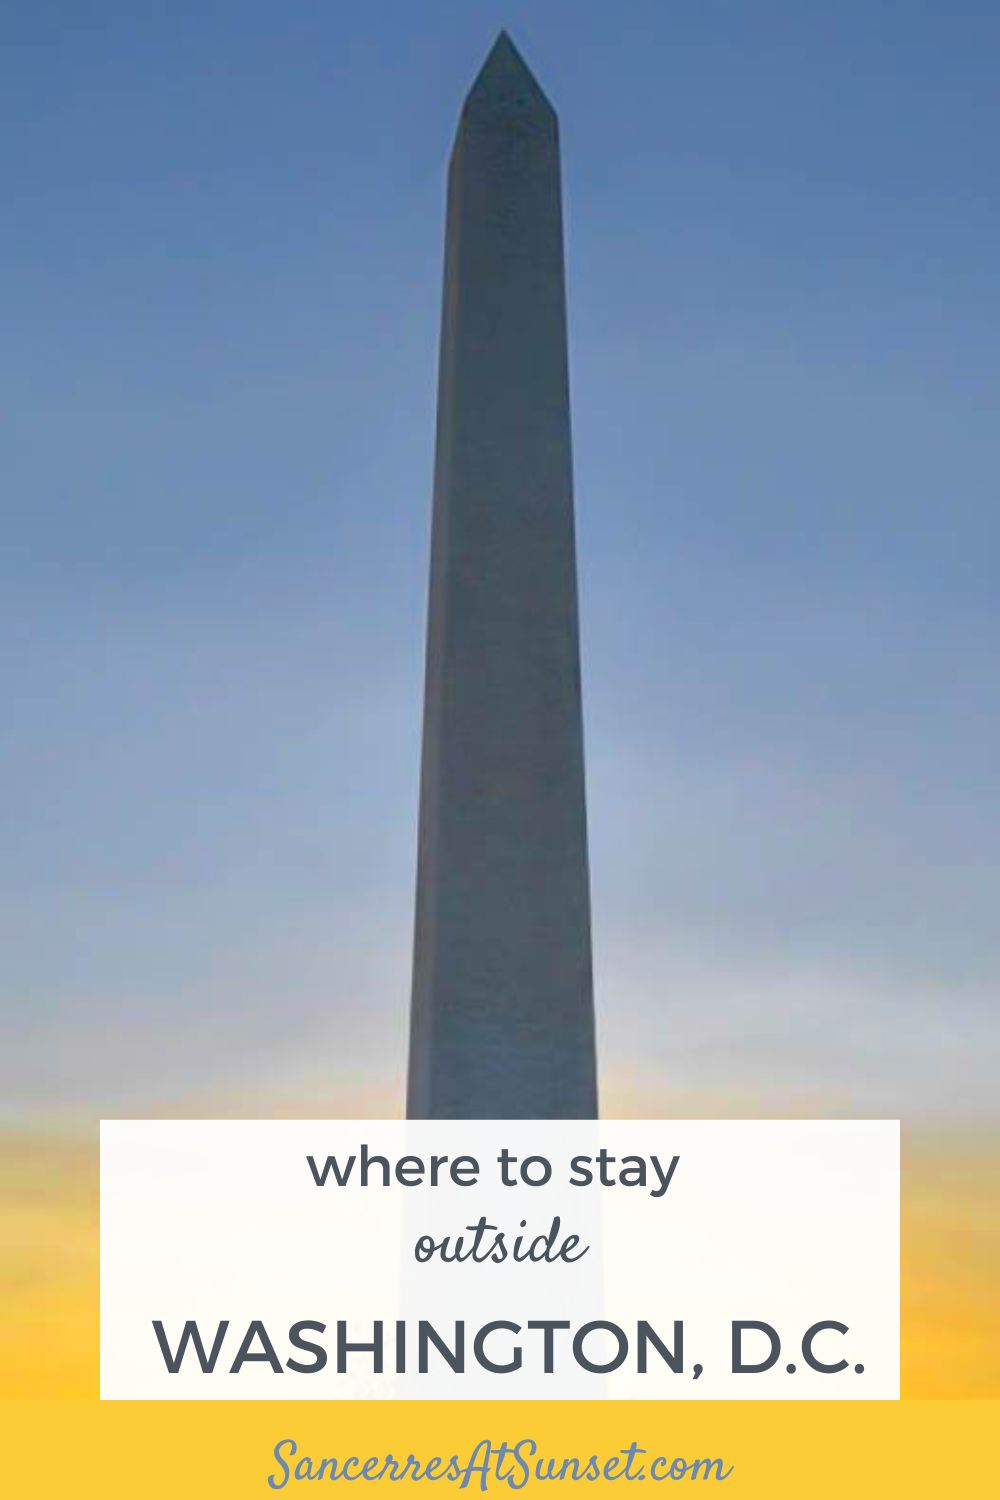 Where to Stay outside Washington, D.C.